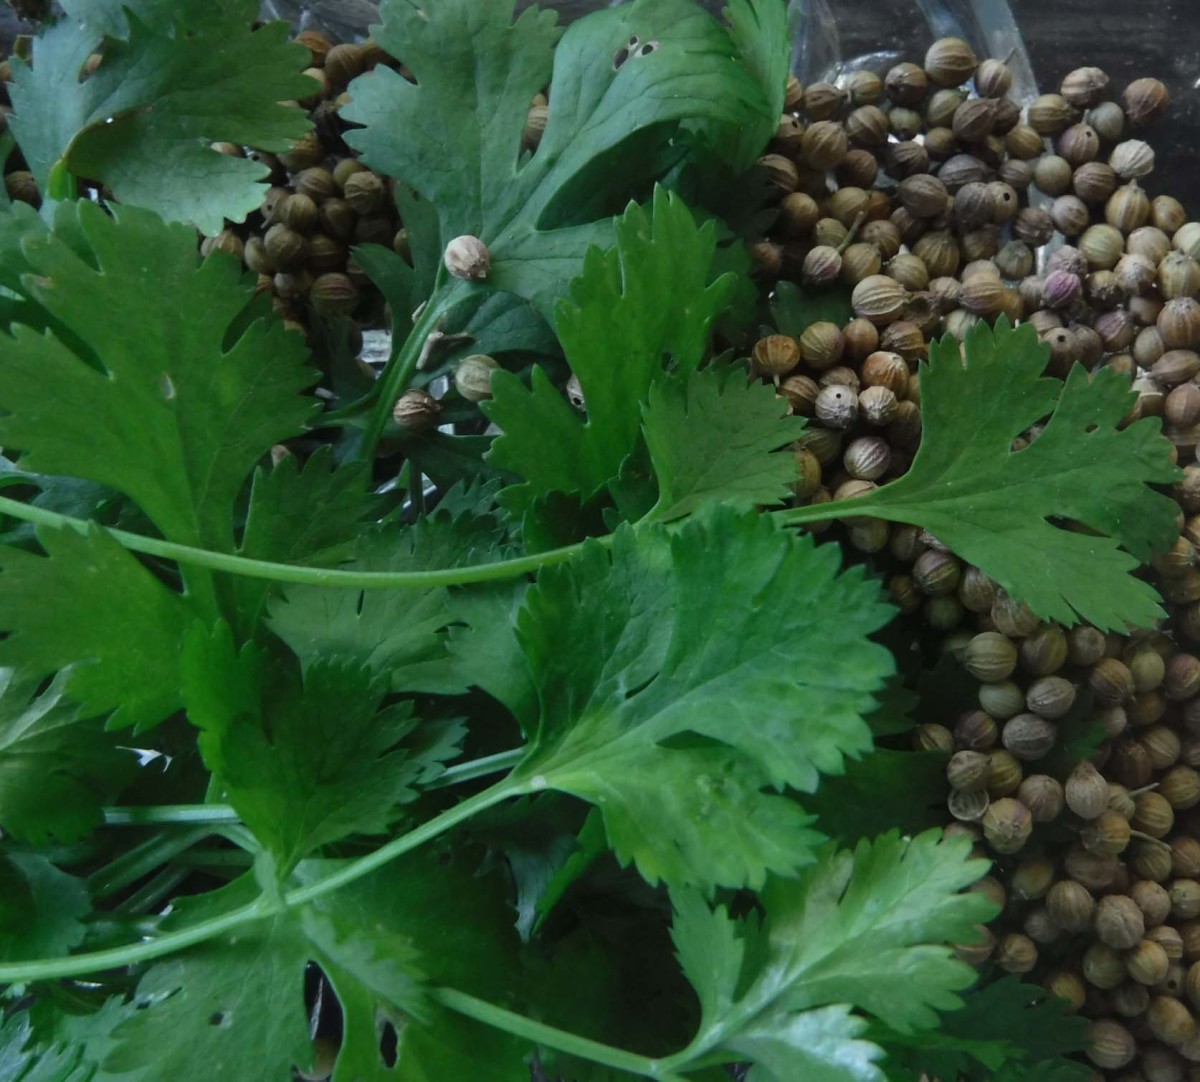 Cilantro and Coriander is The Herb Spice Duo in My Garden